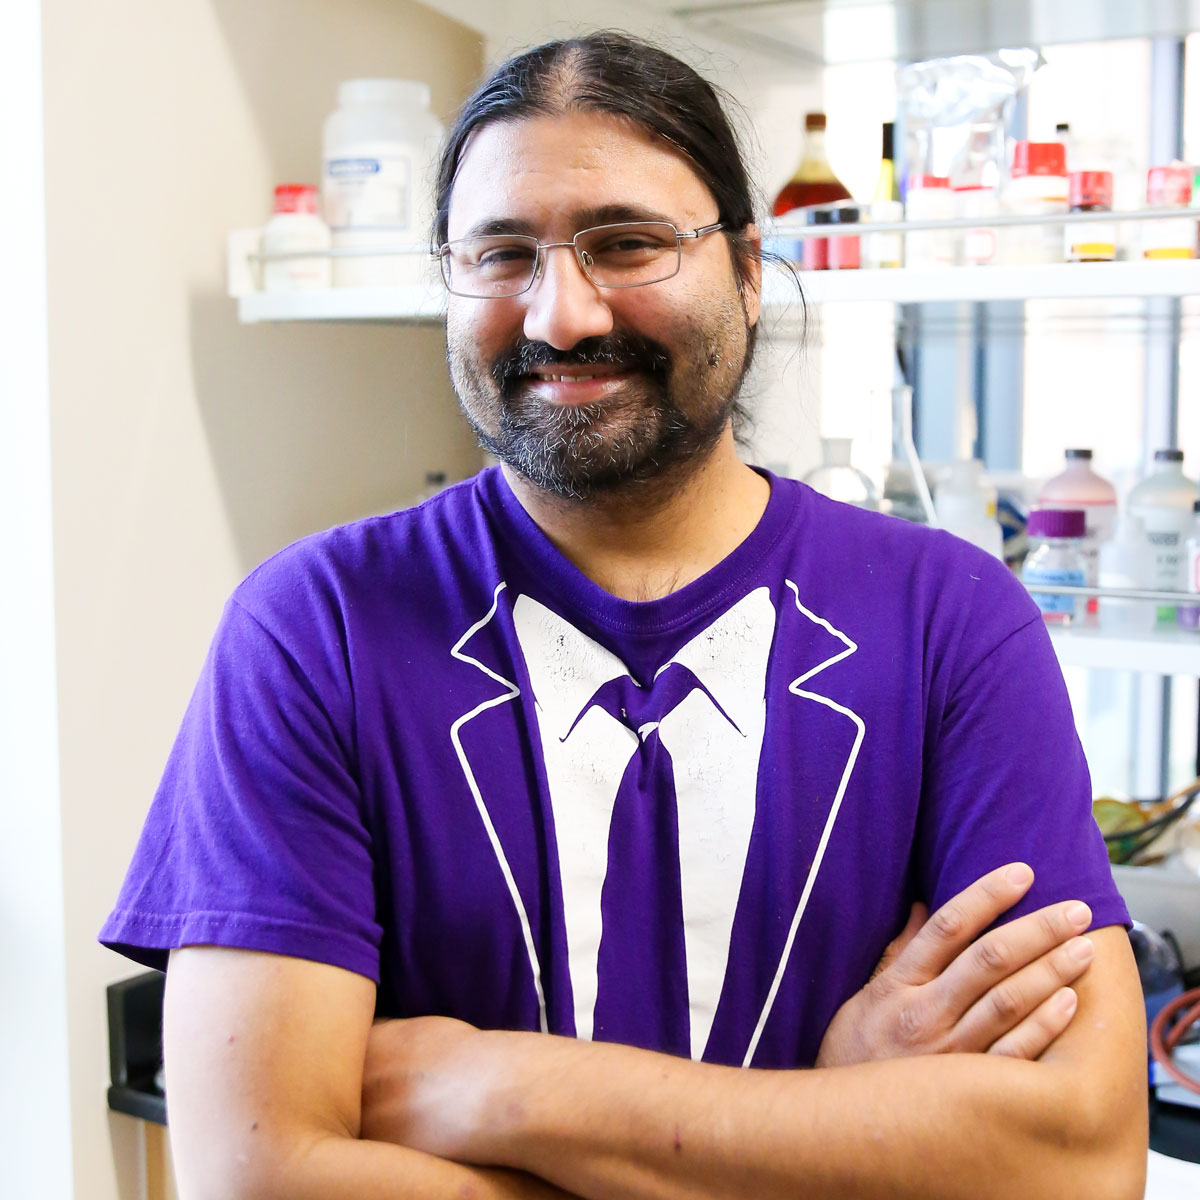 Associate Professor Jai Shanata ’05 wears his “formal” research attire in a Russell Science Center chemistry lab.